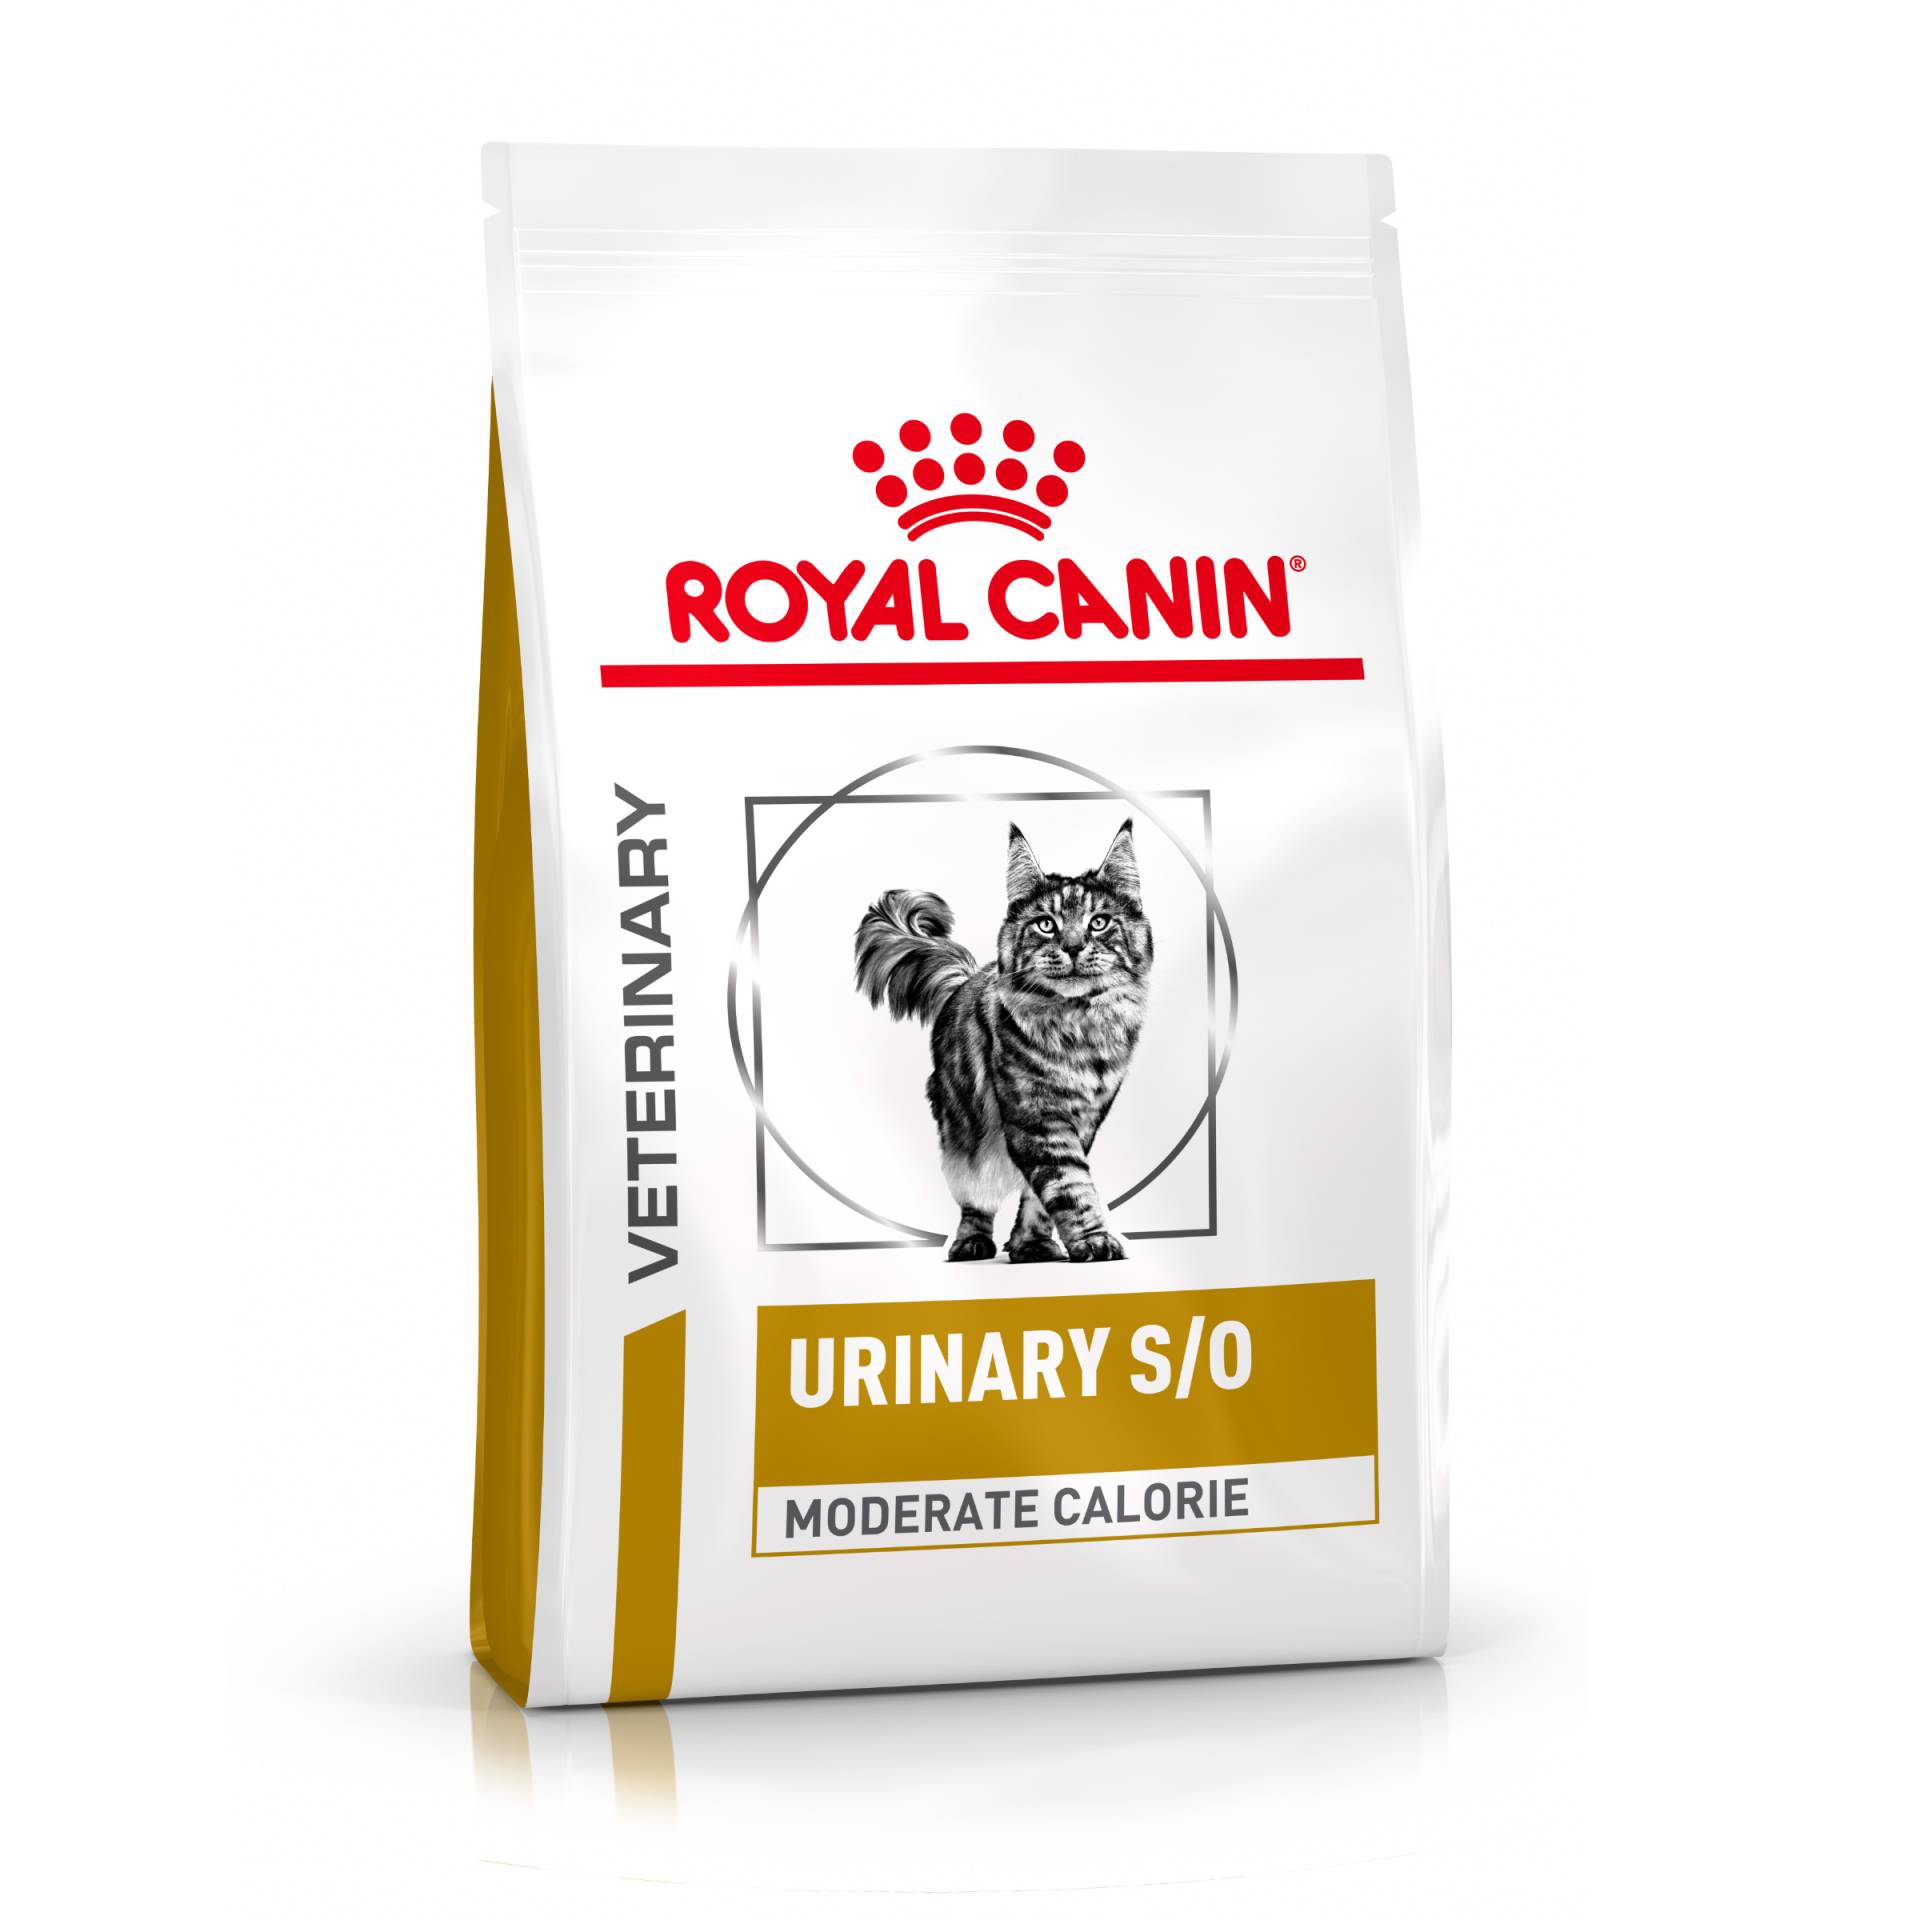 Royal Canin Veterinary Feline Urinary S/O Moderate Calorie - Sparpaket: 2 x 9 kg von Royal Canin Veterinary Diet